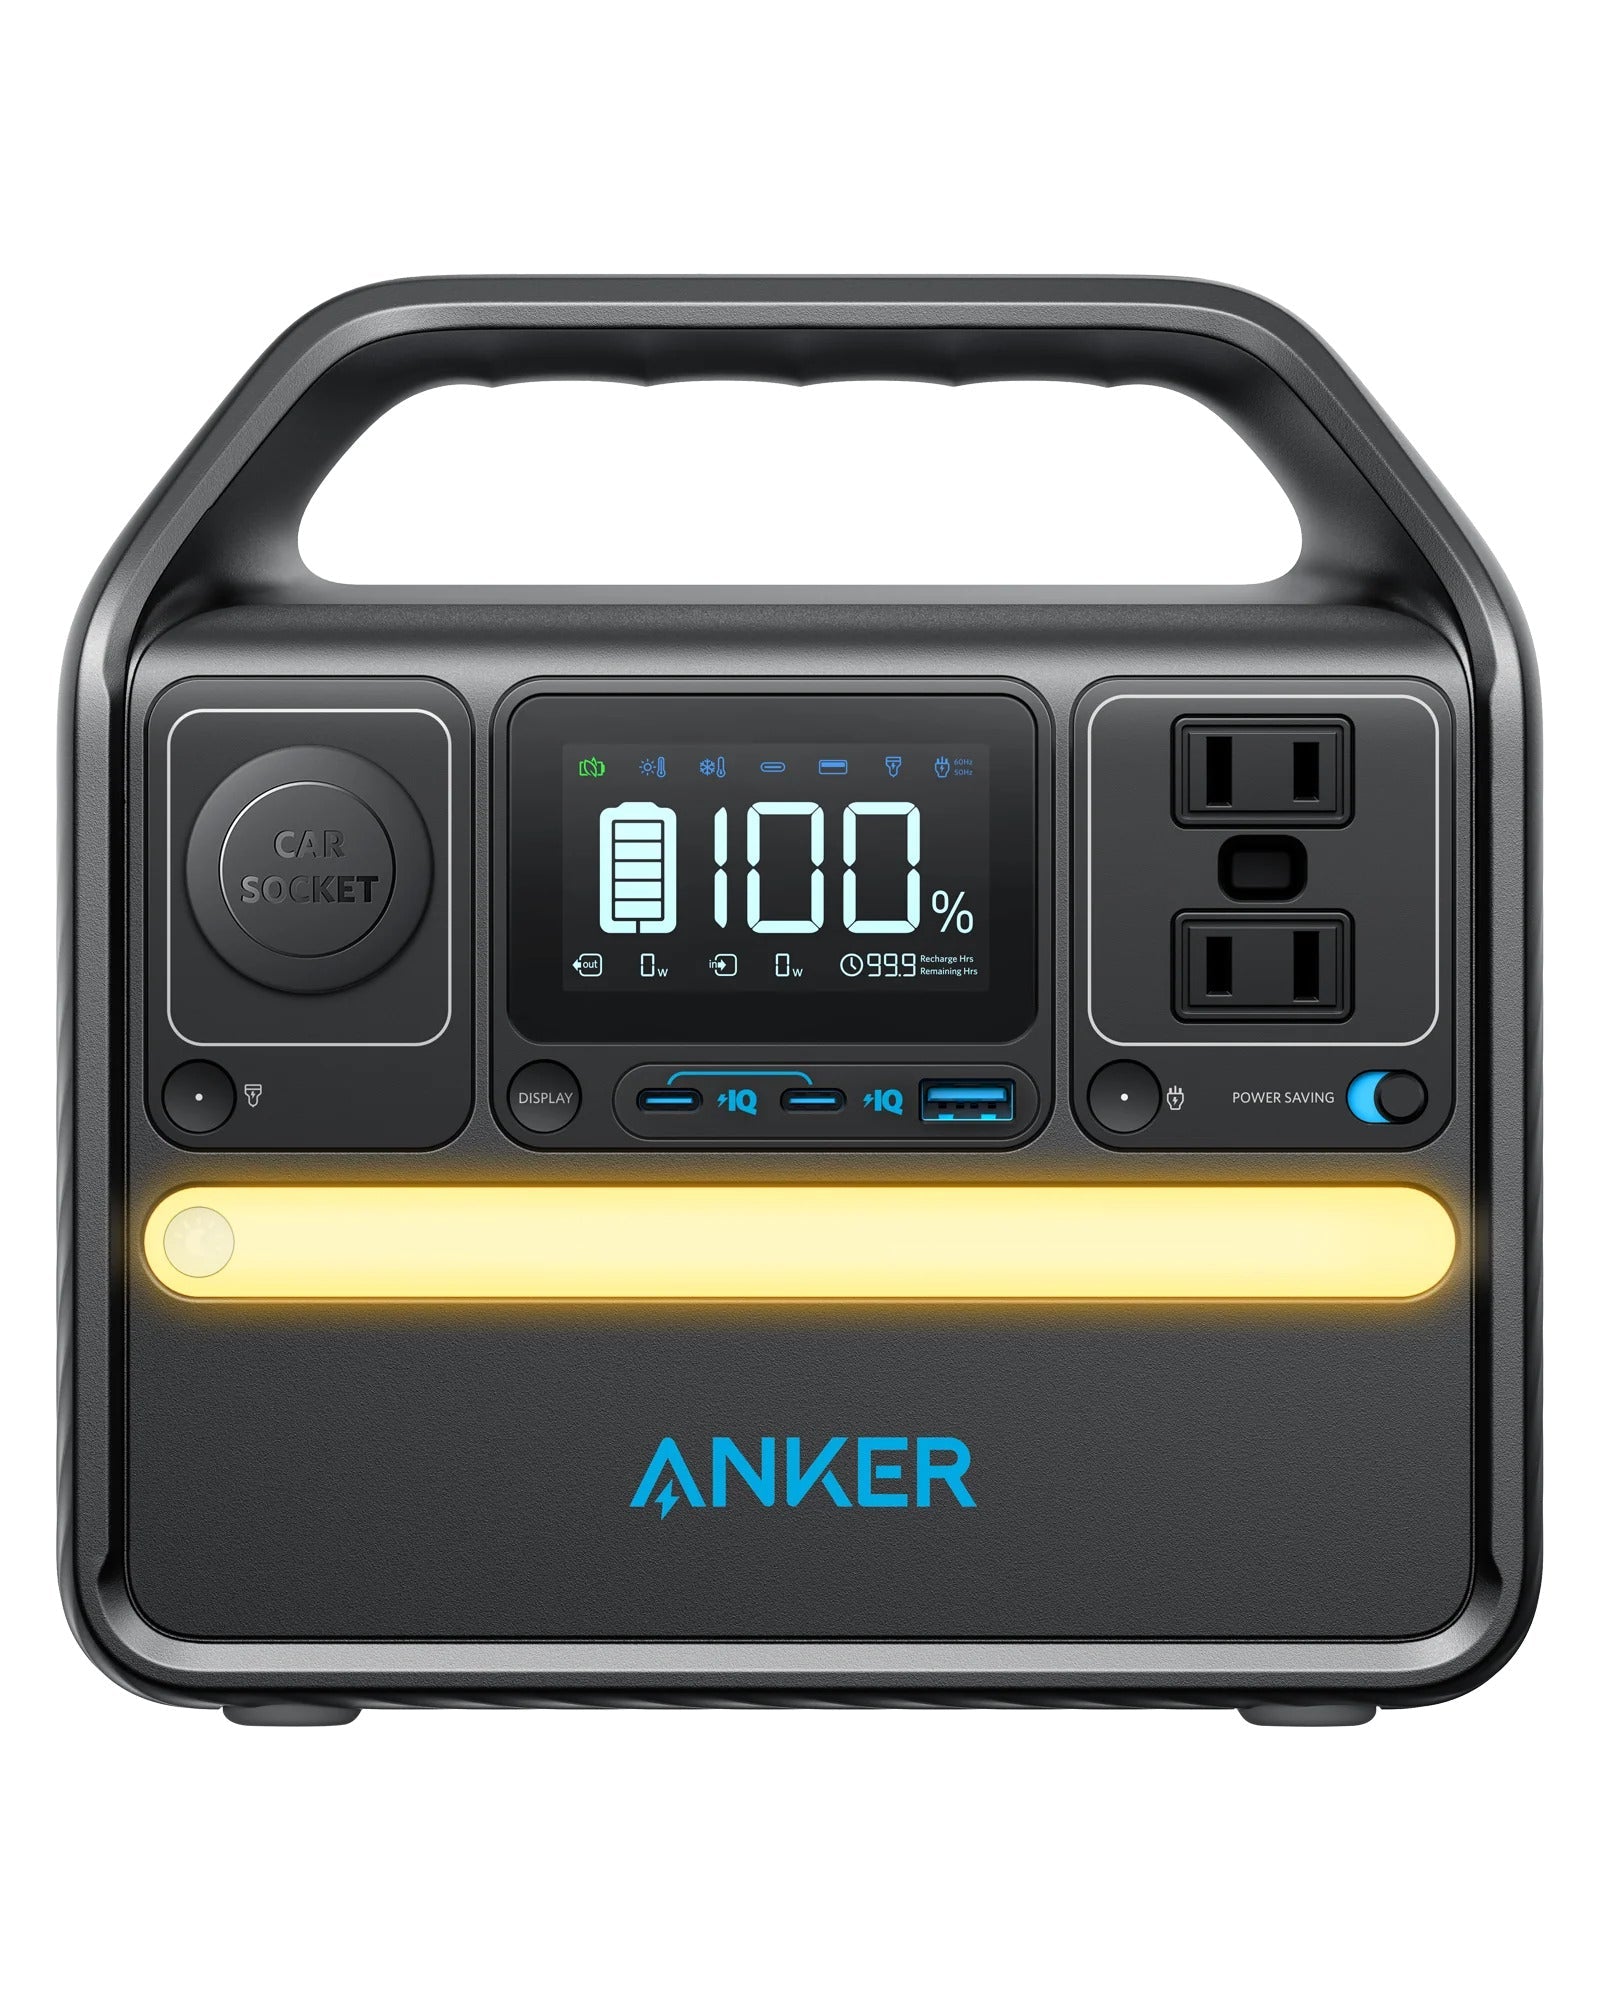 Solar & Battery Powered - Anker 522 299Wh/300W Portable Power Station